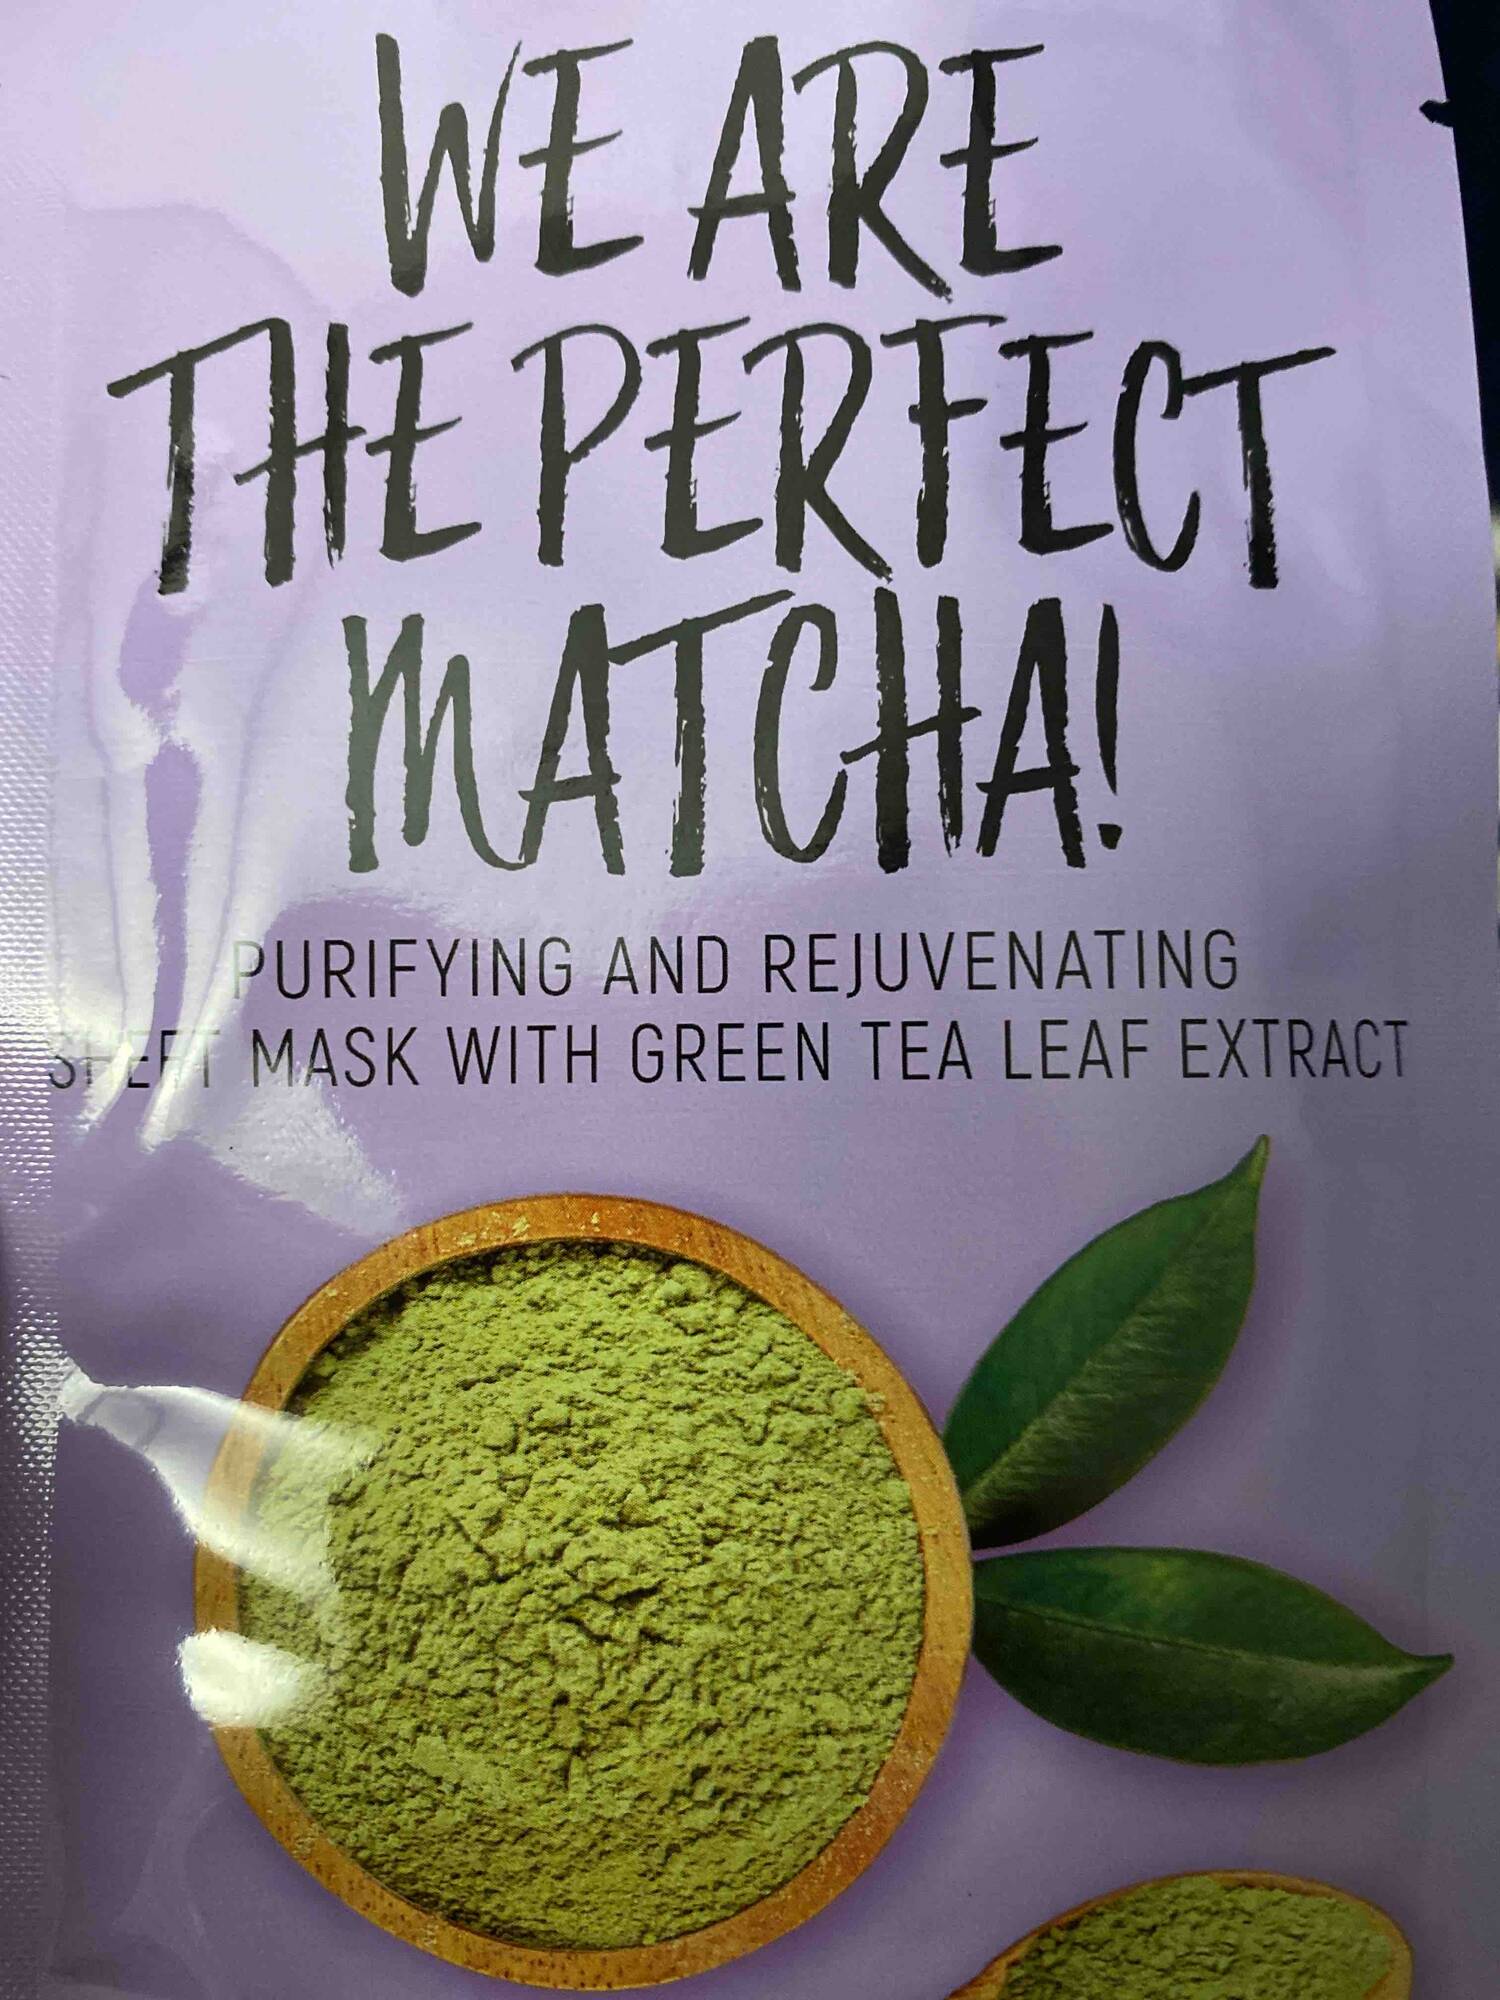 THE BEAUTY DEPT - We are the perfect matcha ! - Mask with green tea